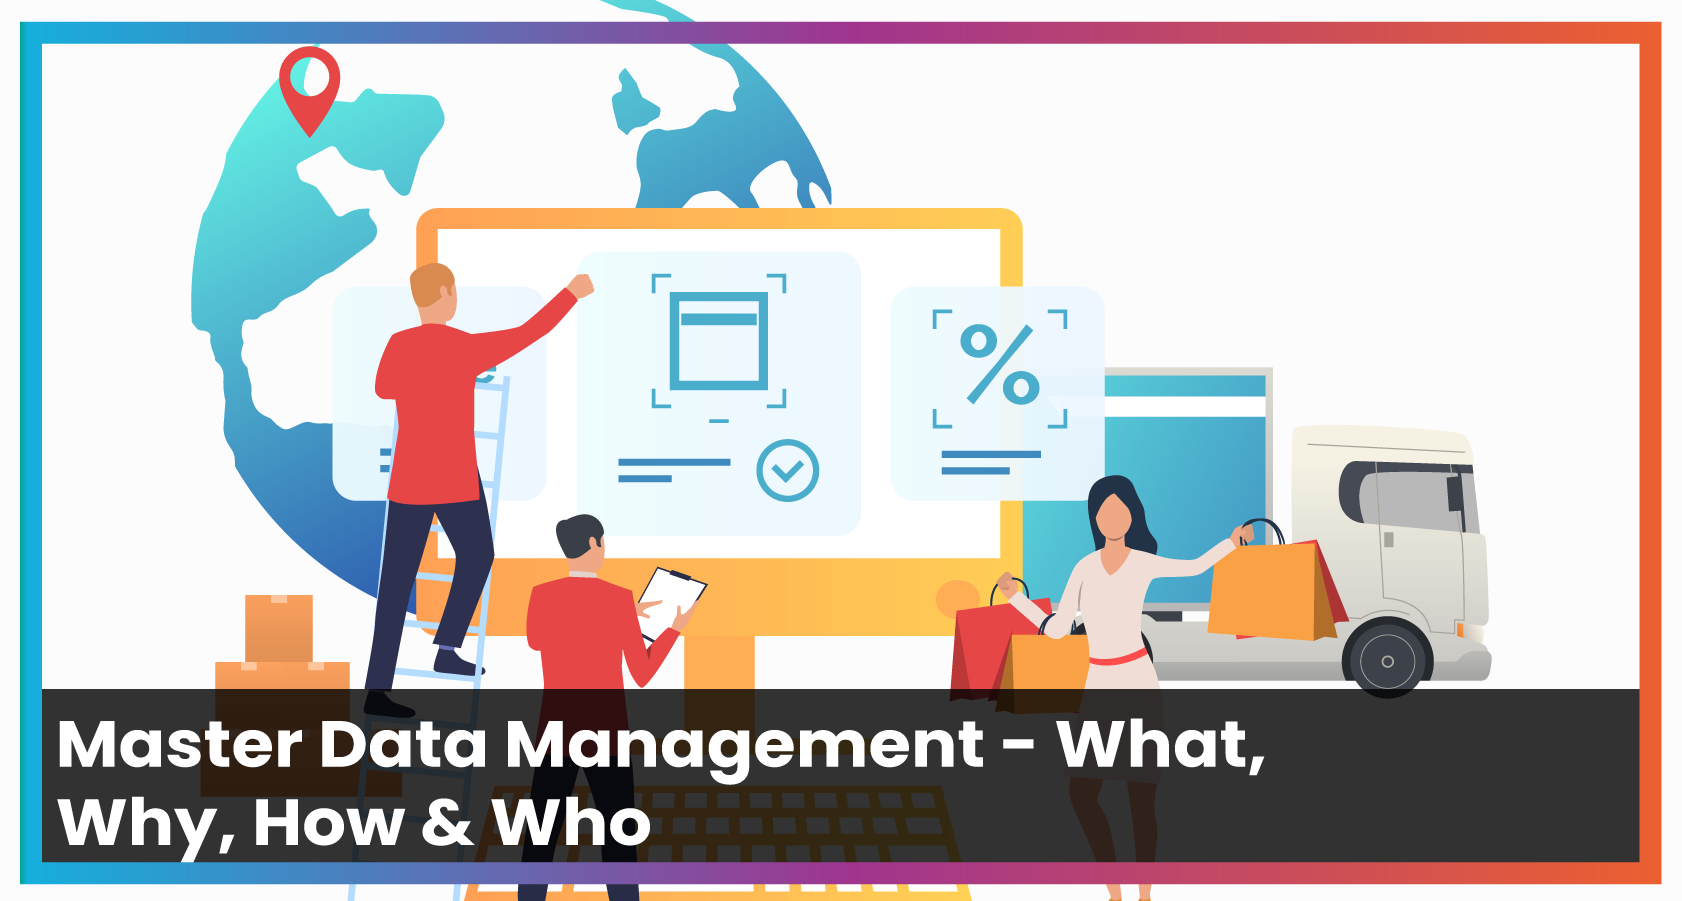 Master Data Management – What, Why, How & Who